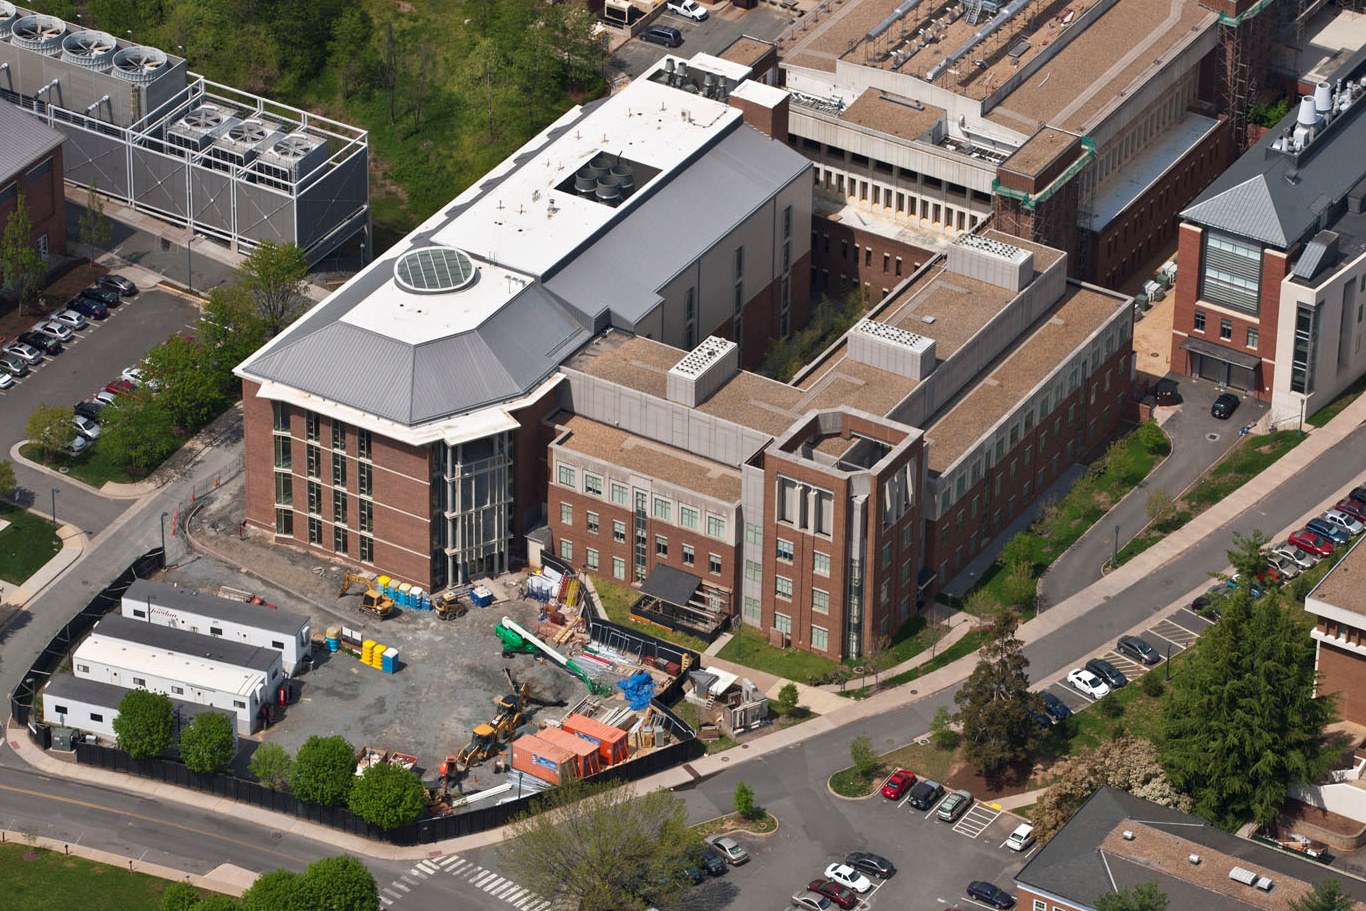 Aerial view of the multi story brick Physical and life sciences research building